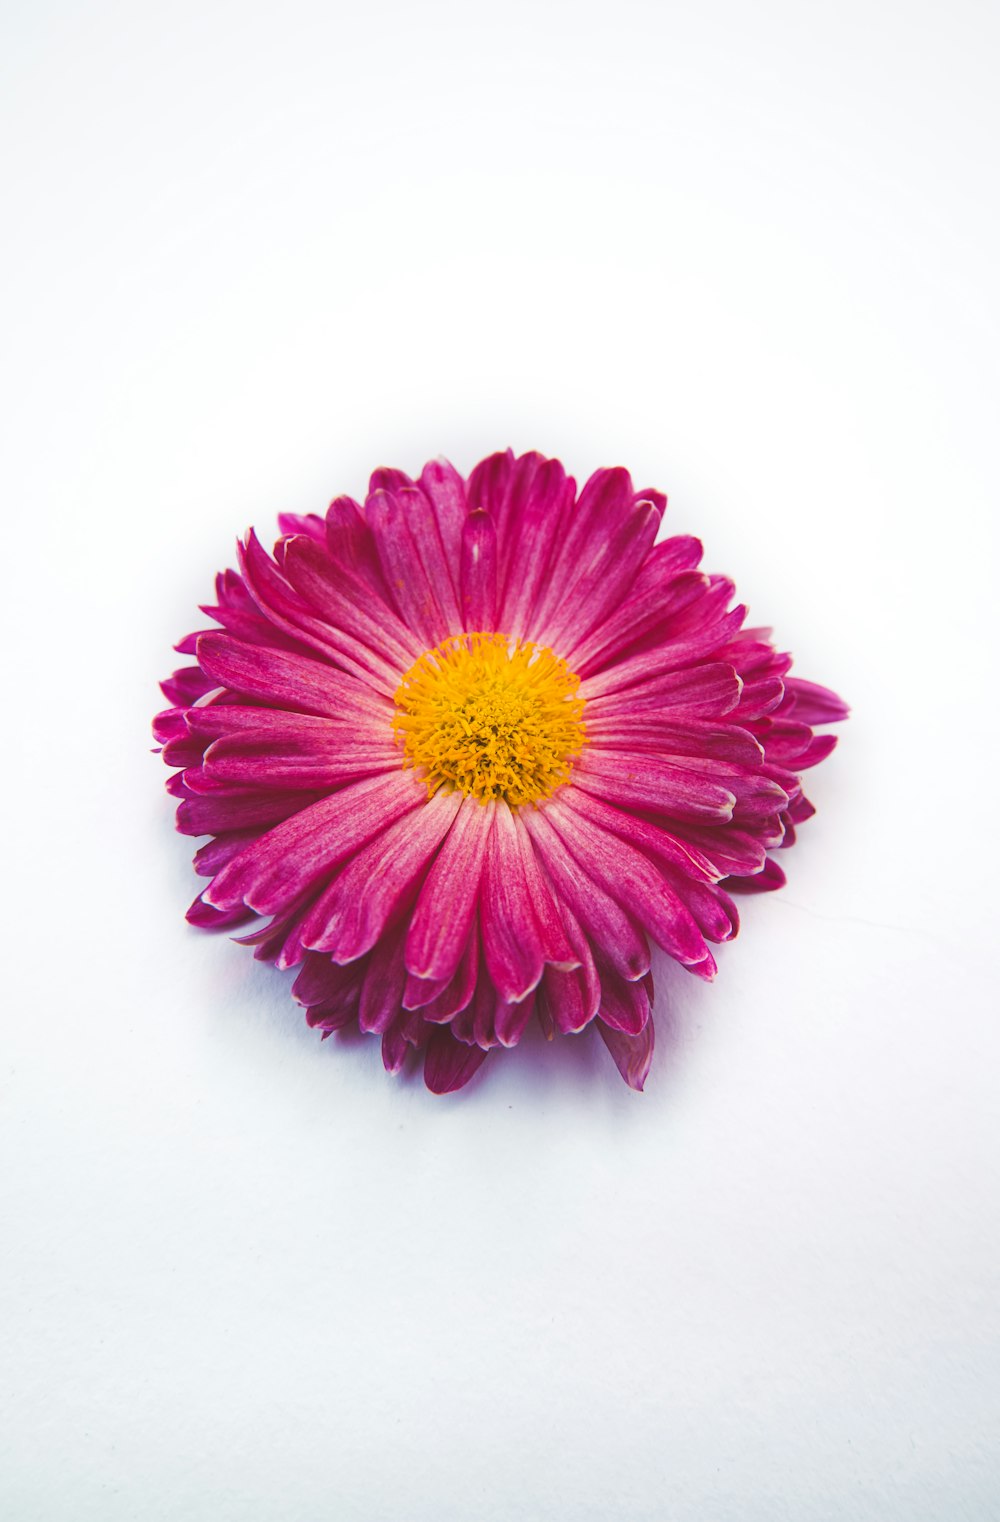 a pink flower with a yellow center on a white surface